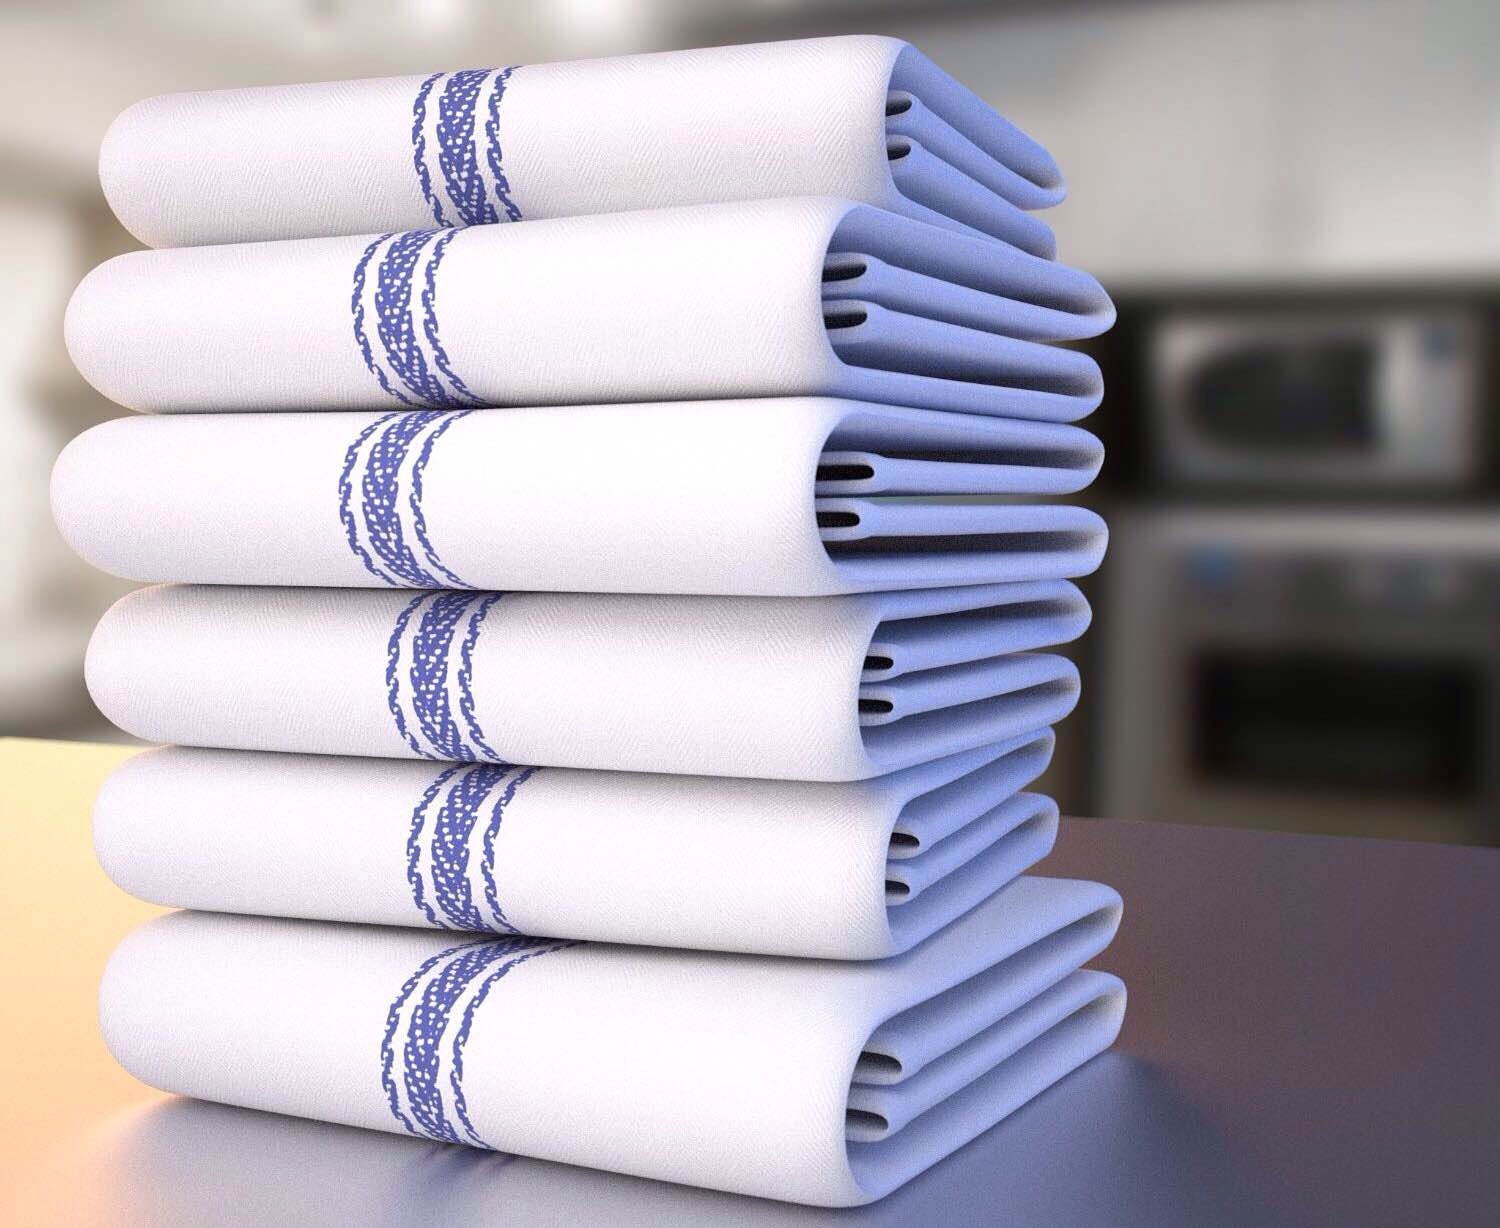 Keeble Outlets' professional-grade kitchen towels. ($20 for pack of 12)